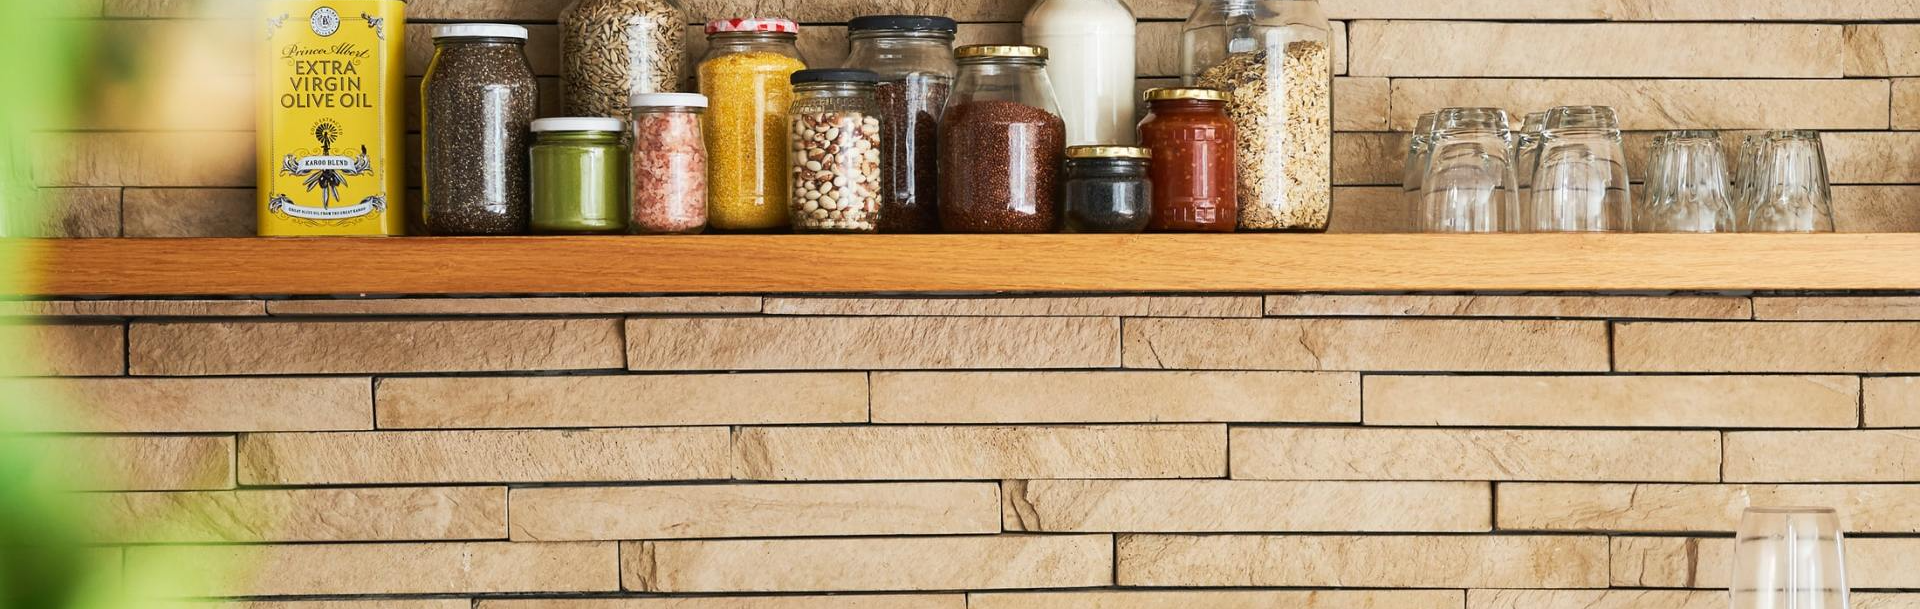 Kitchen Shelf with Jars and Glasses